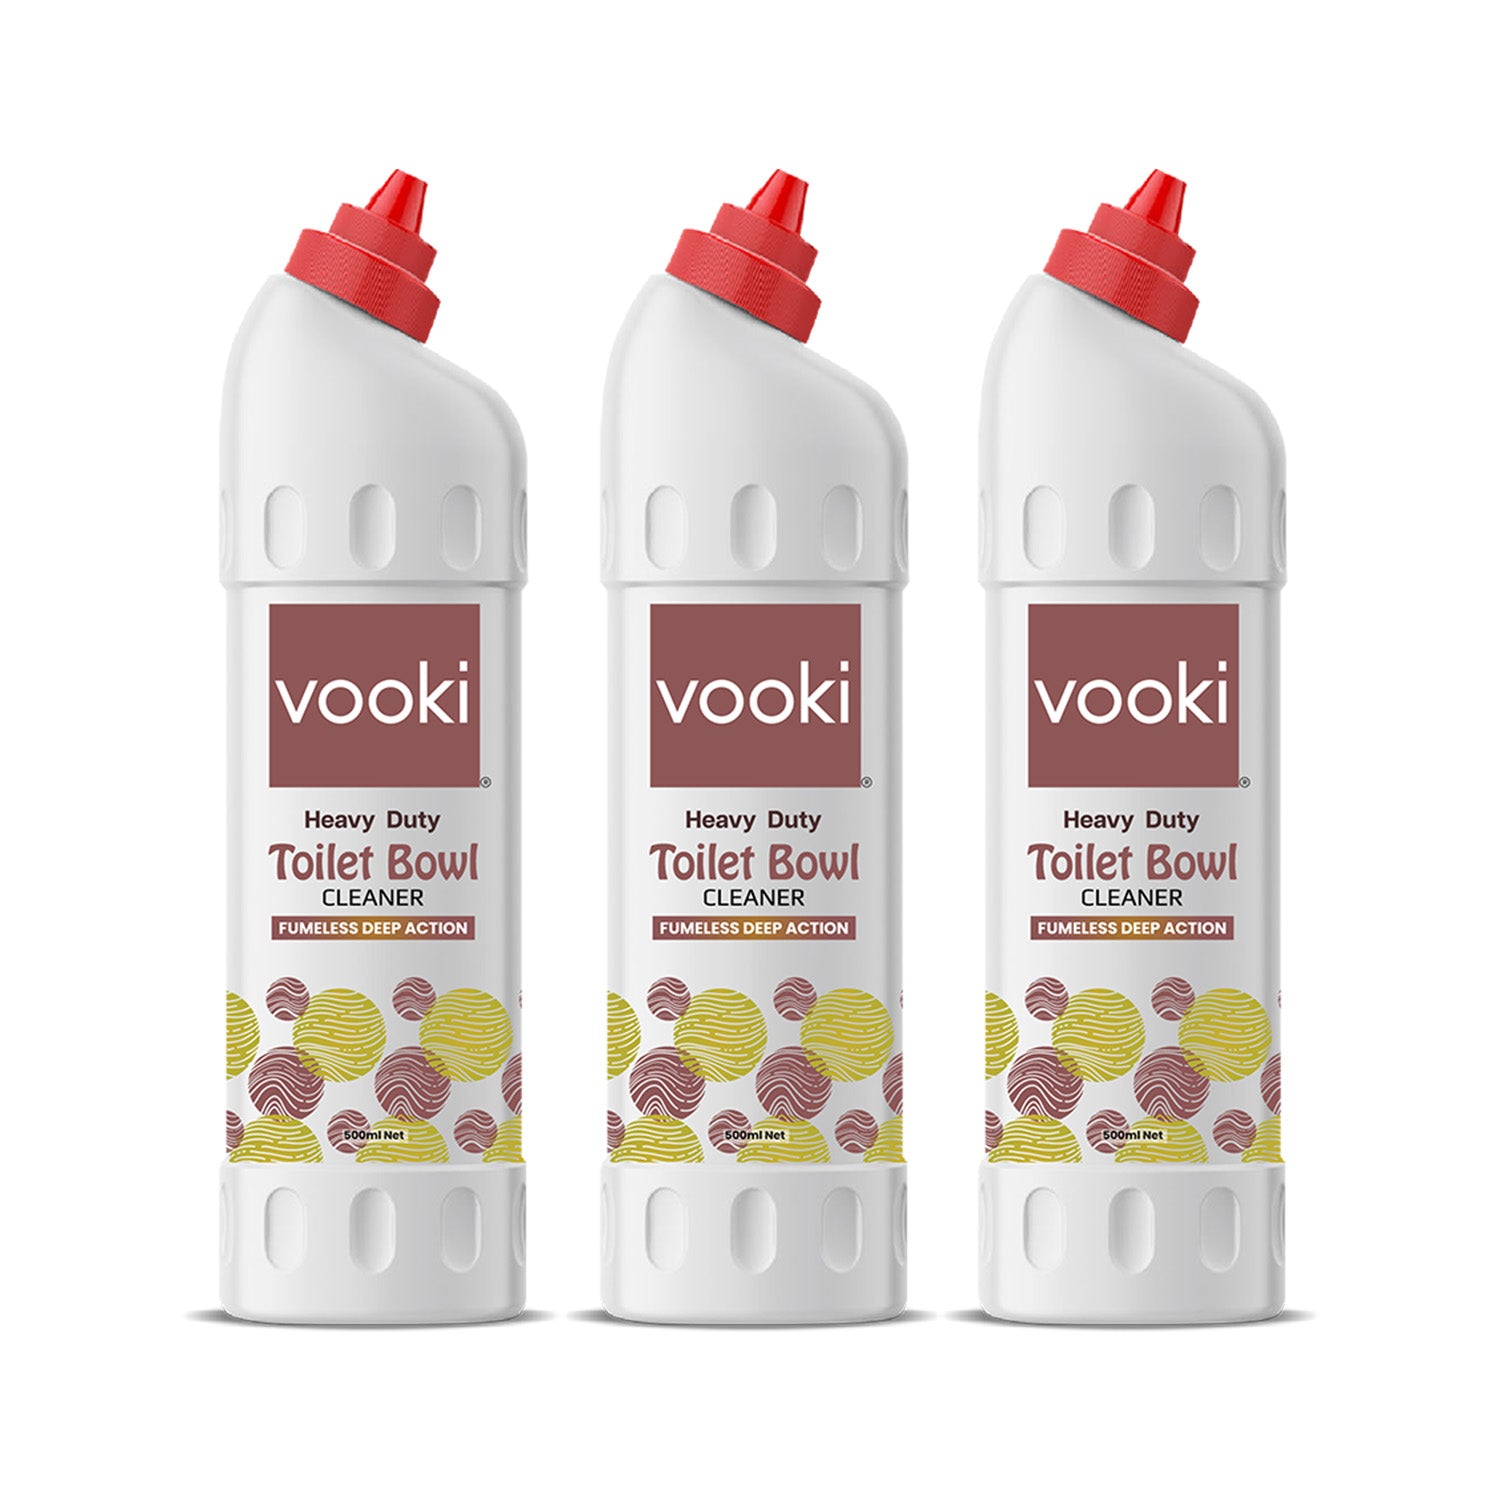 3 bottle of vooki toilet bowl cleaner, designed to effectively clean and disinfect toilet bowls.